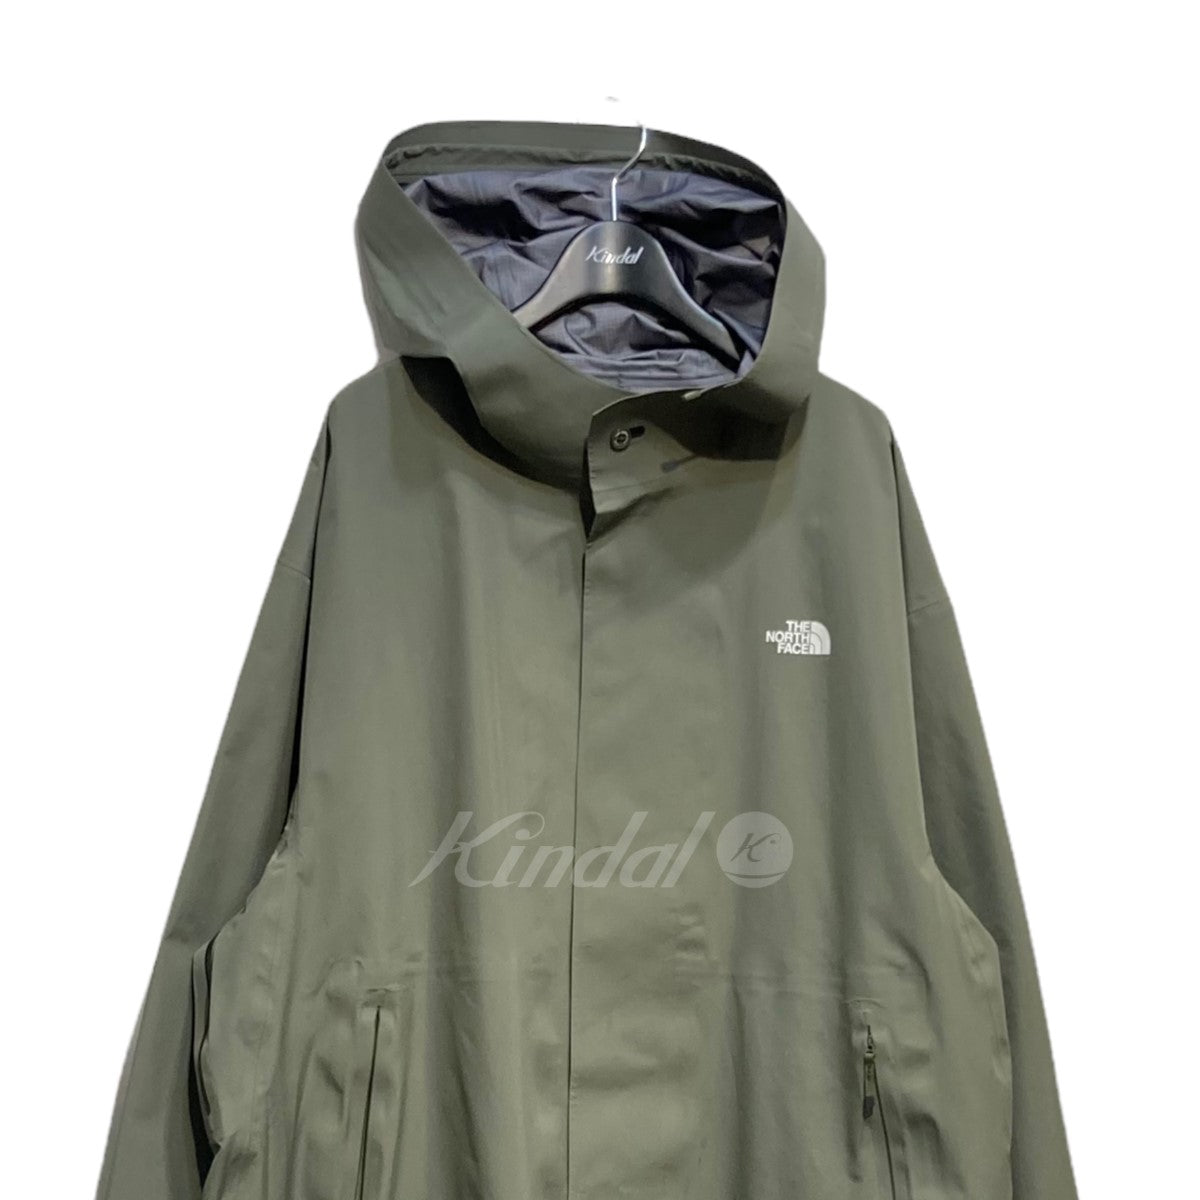 THE NORTH FACE(ザノースフェイス) ×HYKE GTX PRO Hooded Coat NP692HY 